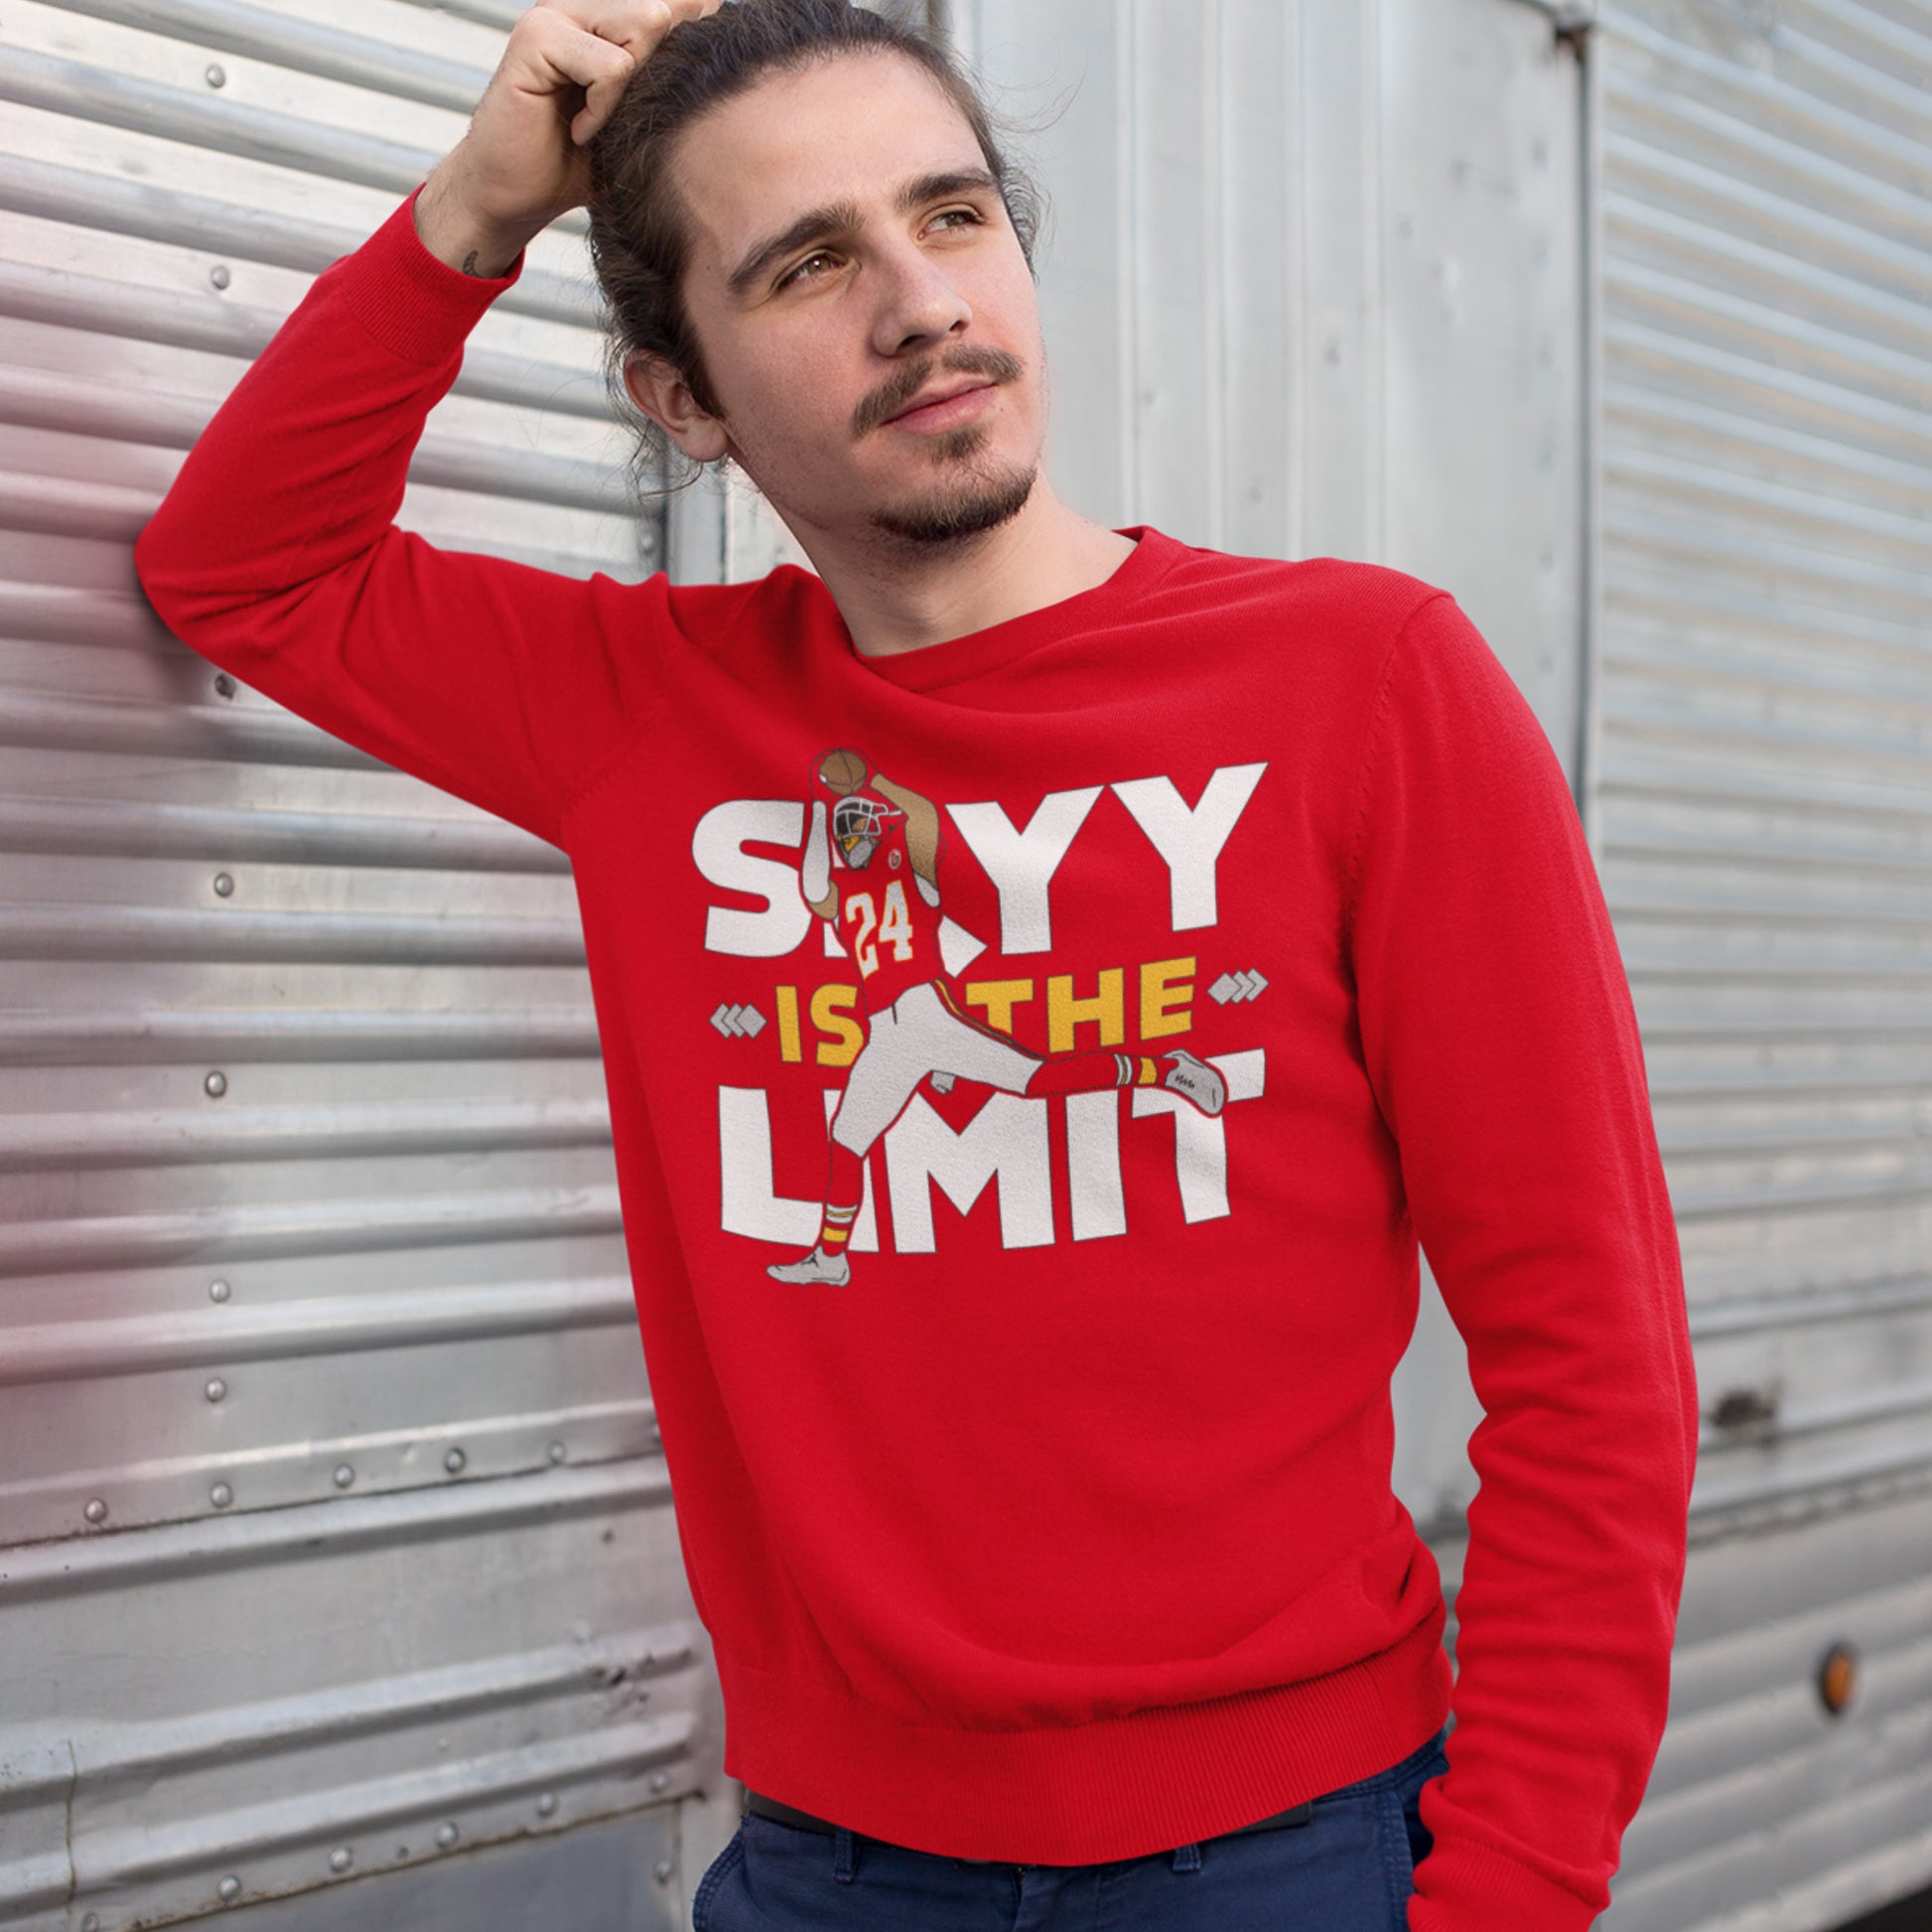 KC Swag Kansas City Chiefs White & Gold Skyy Is The Limit (with football player) on a Red Crewneck Sweatshirt worn by a male model with a goatee leaning on a metal garage door